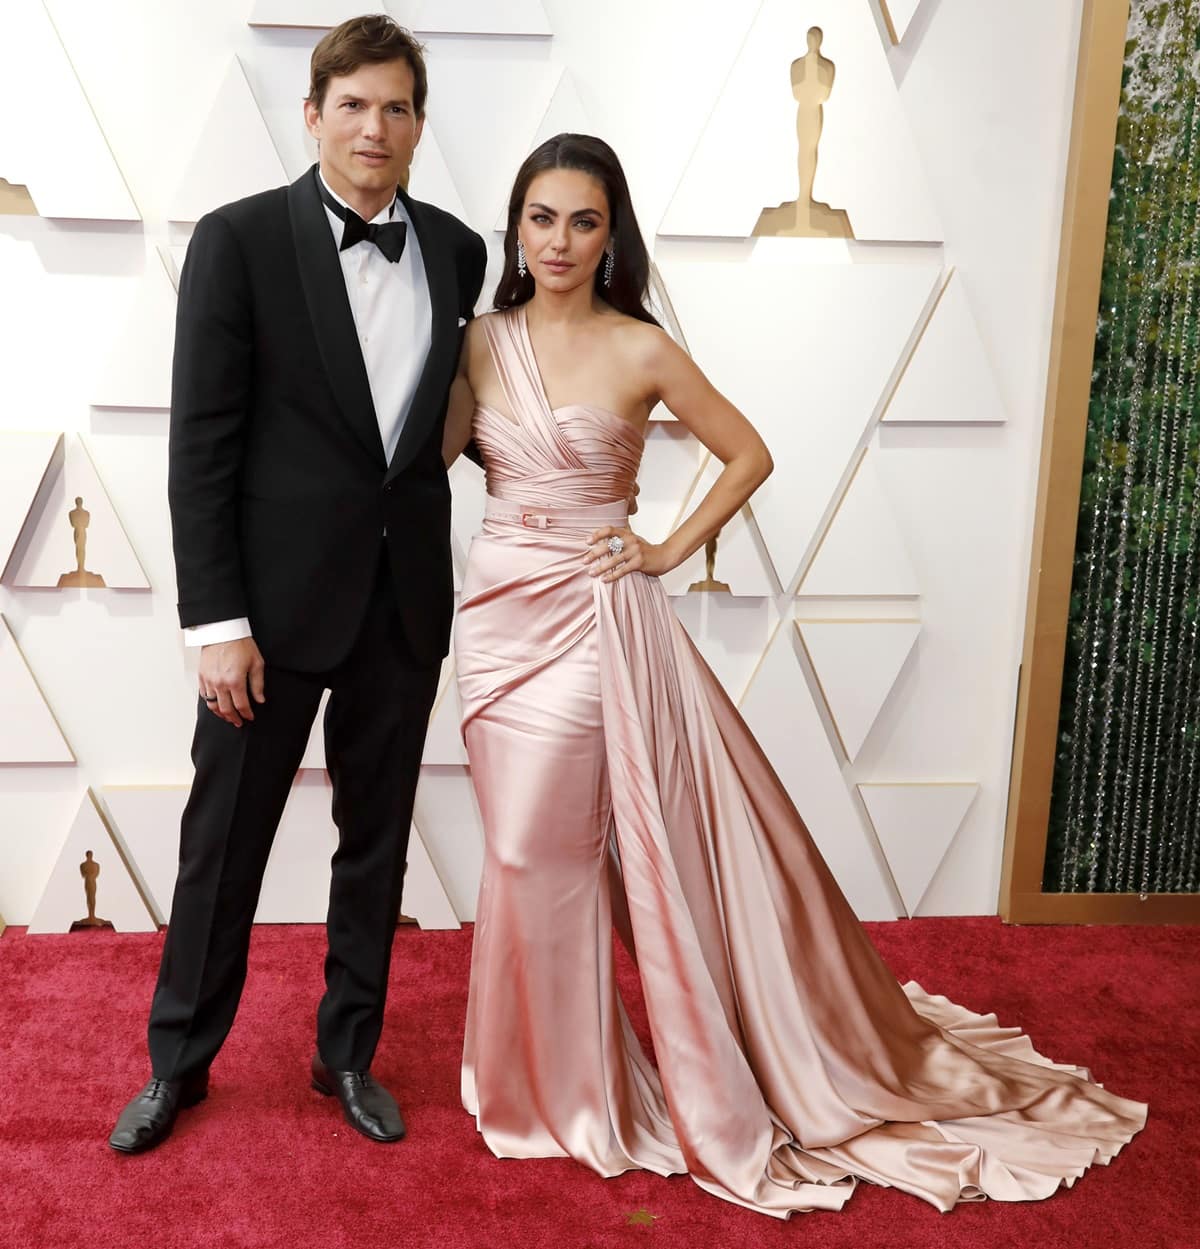 Ashton Kutcher and his shorter wife Mila Kunis attend the 94th Annual Academy Awards